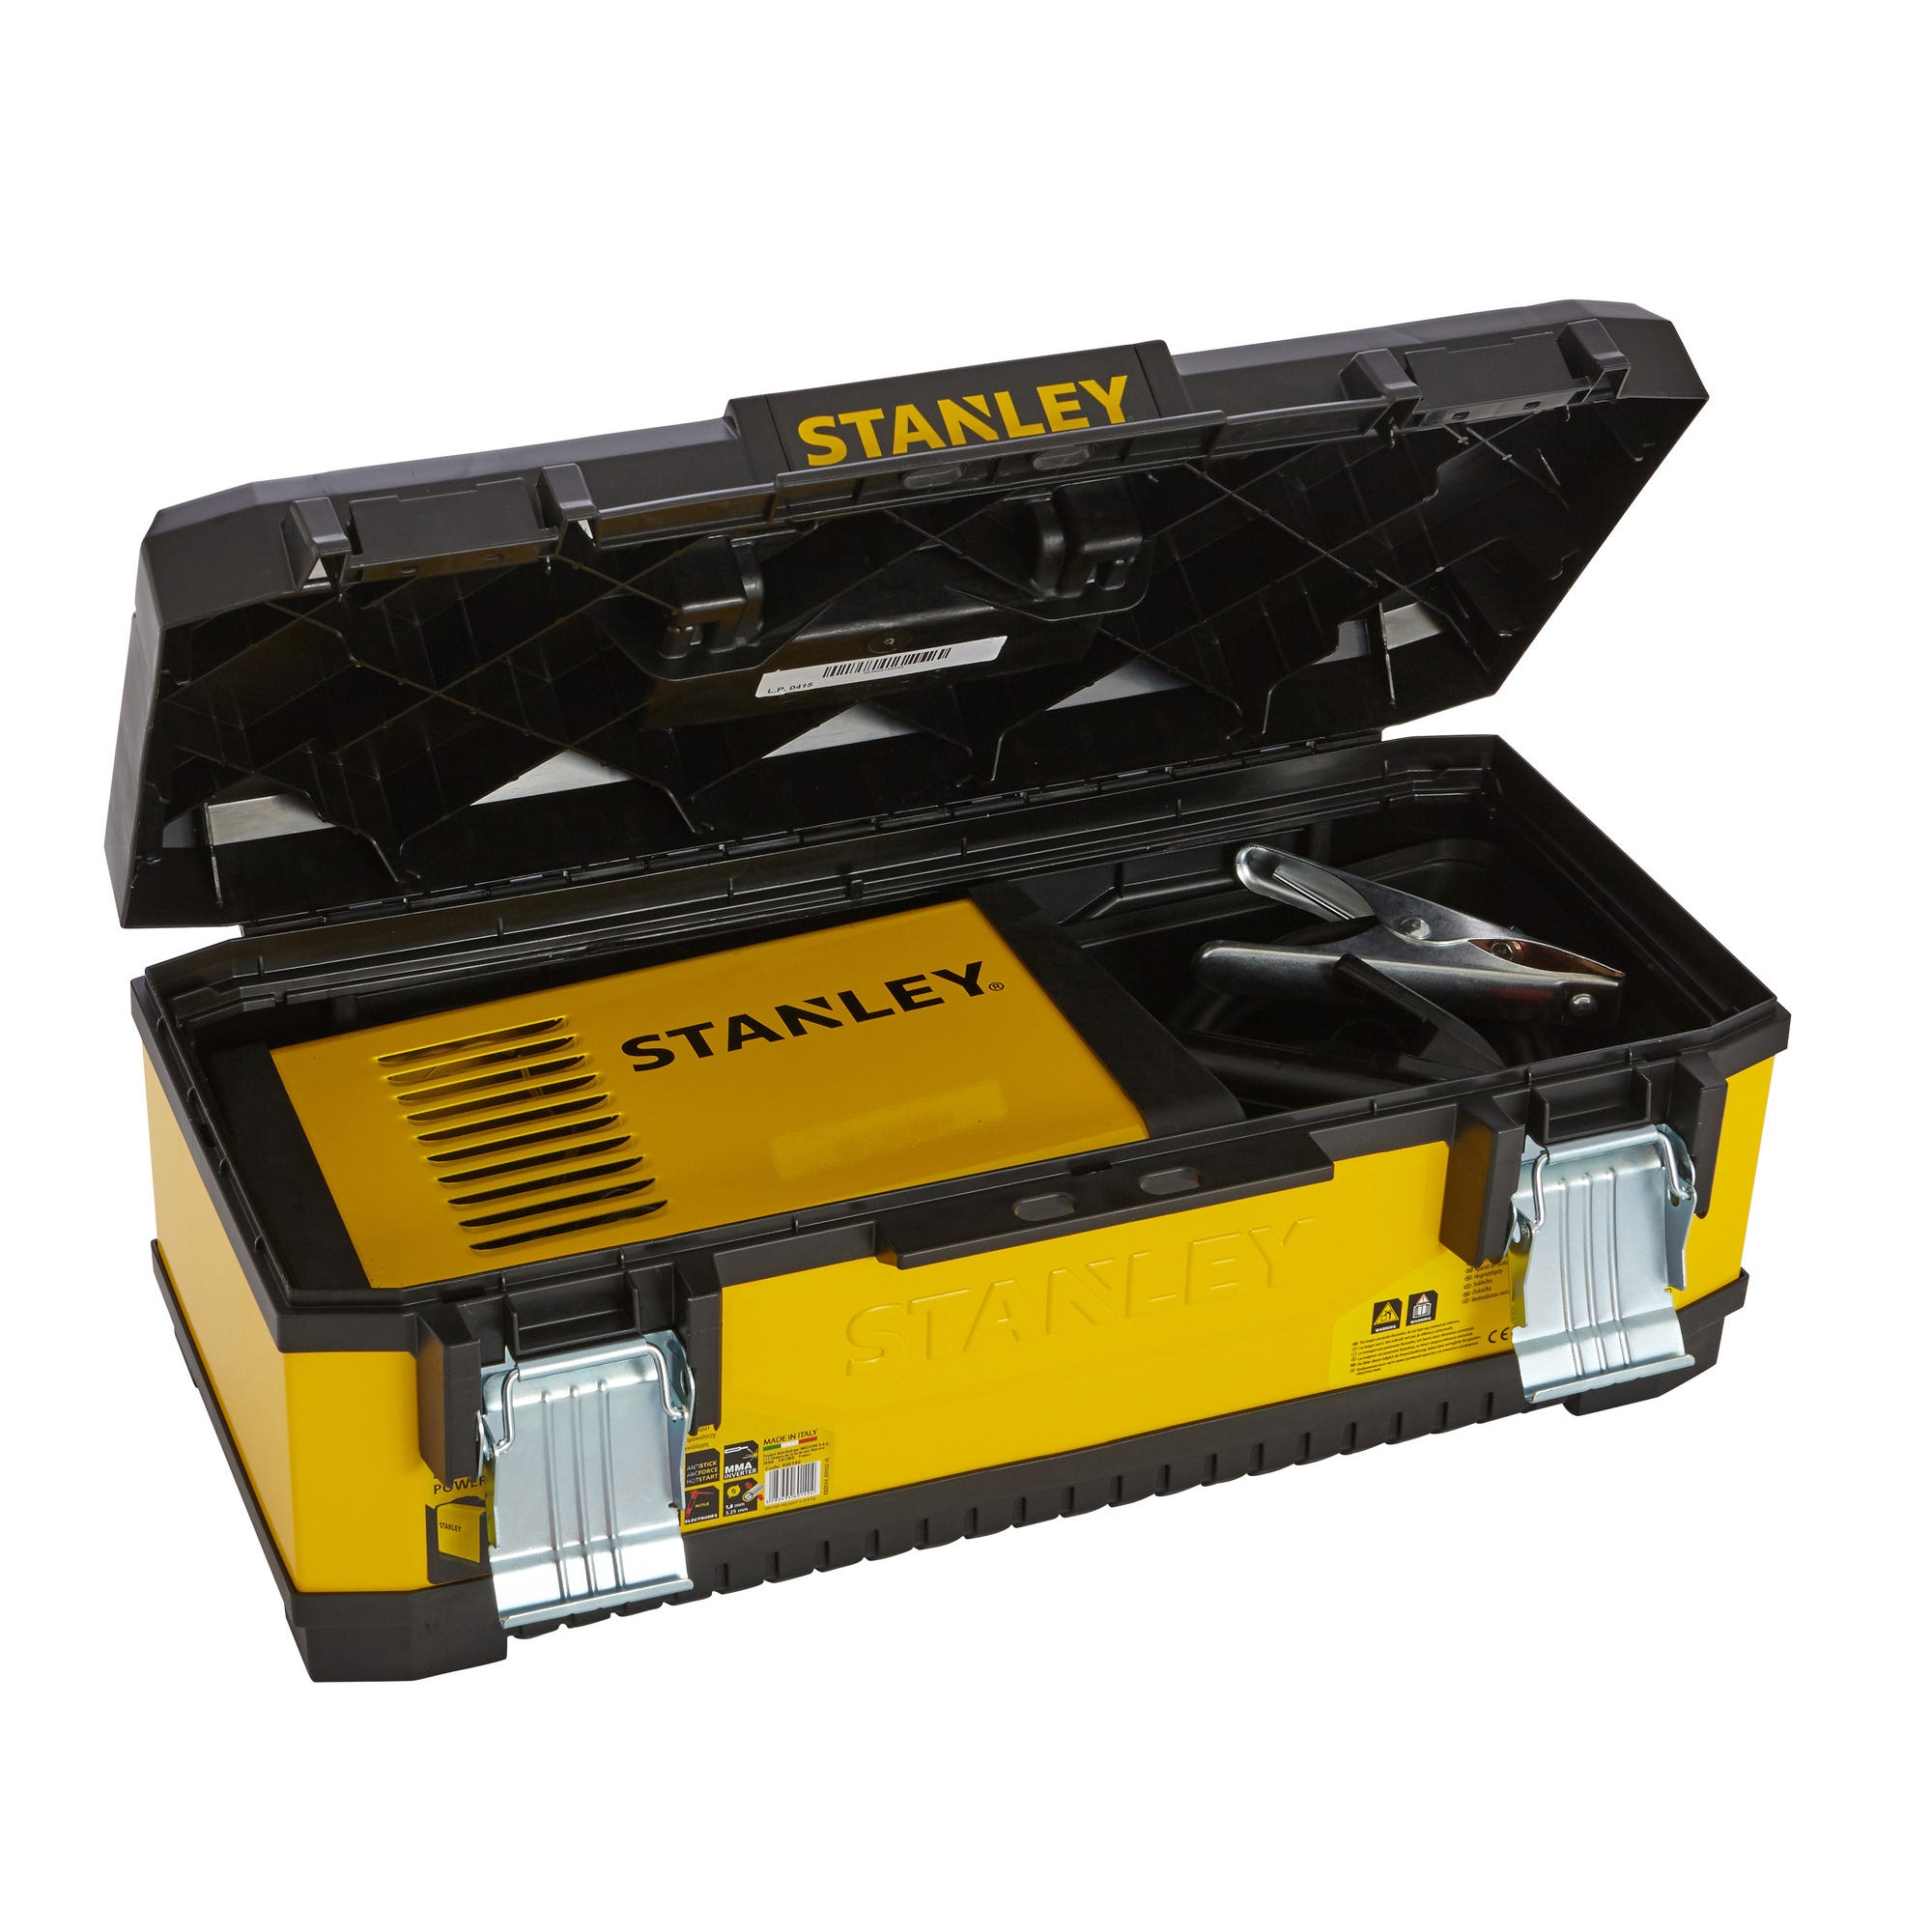 Poste soudage 125a power140 stanley 2